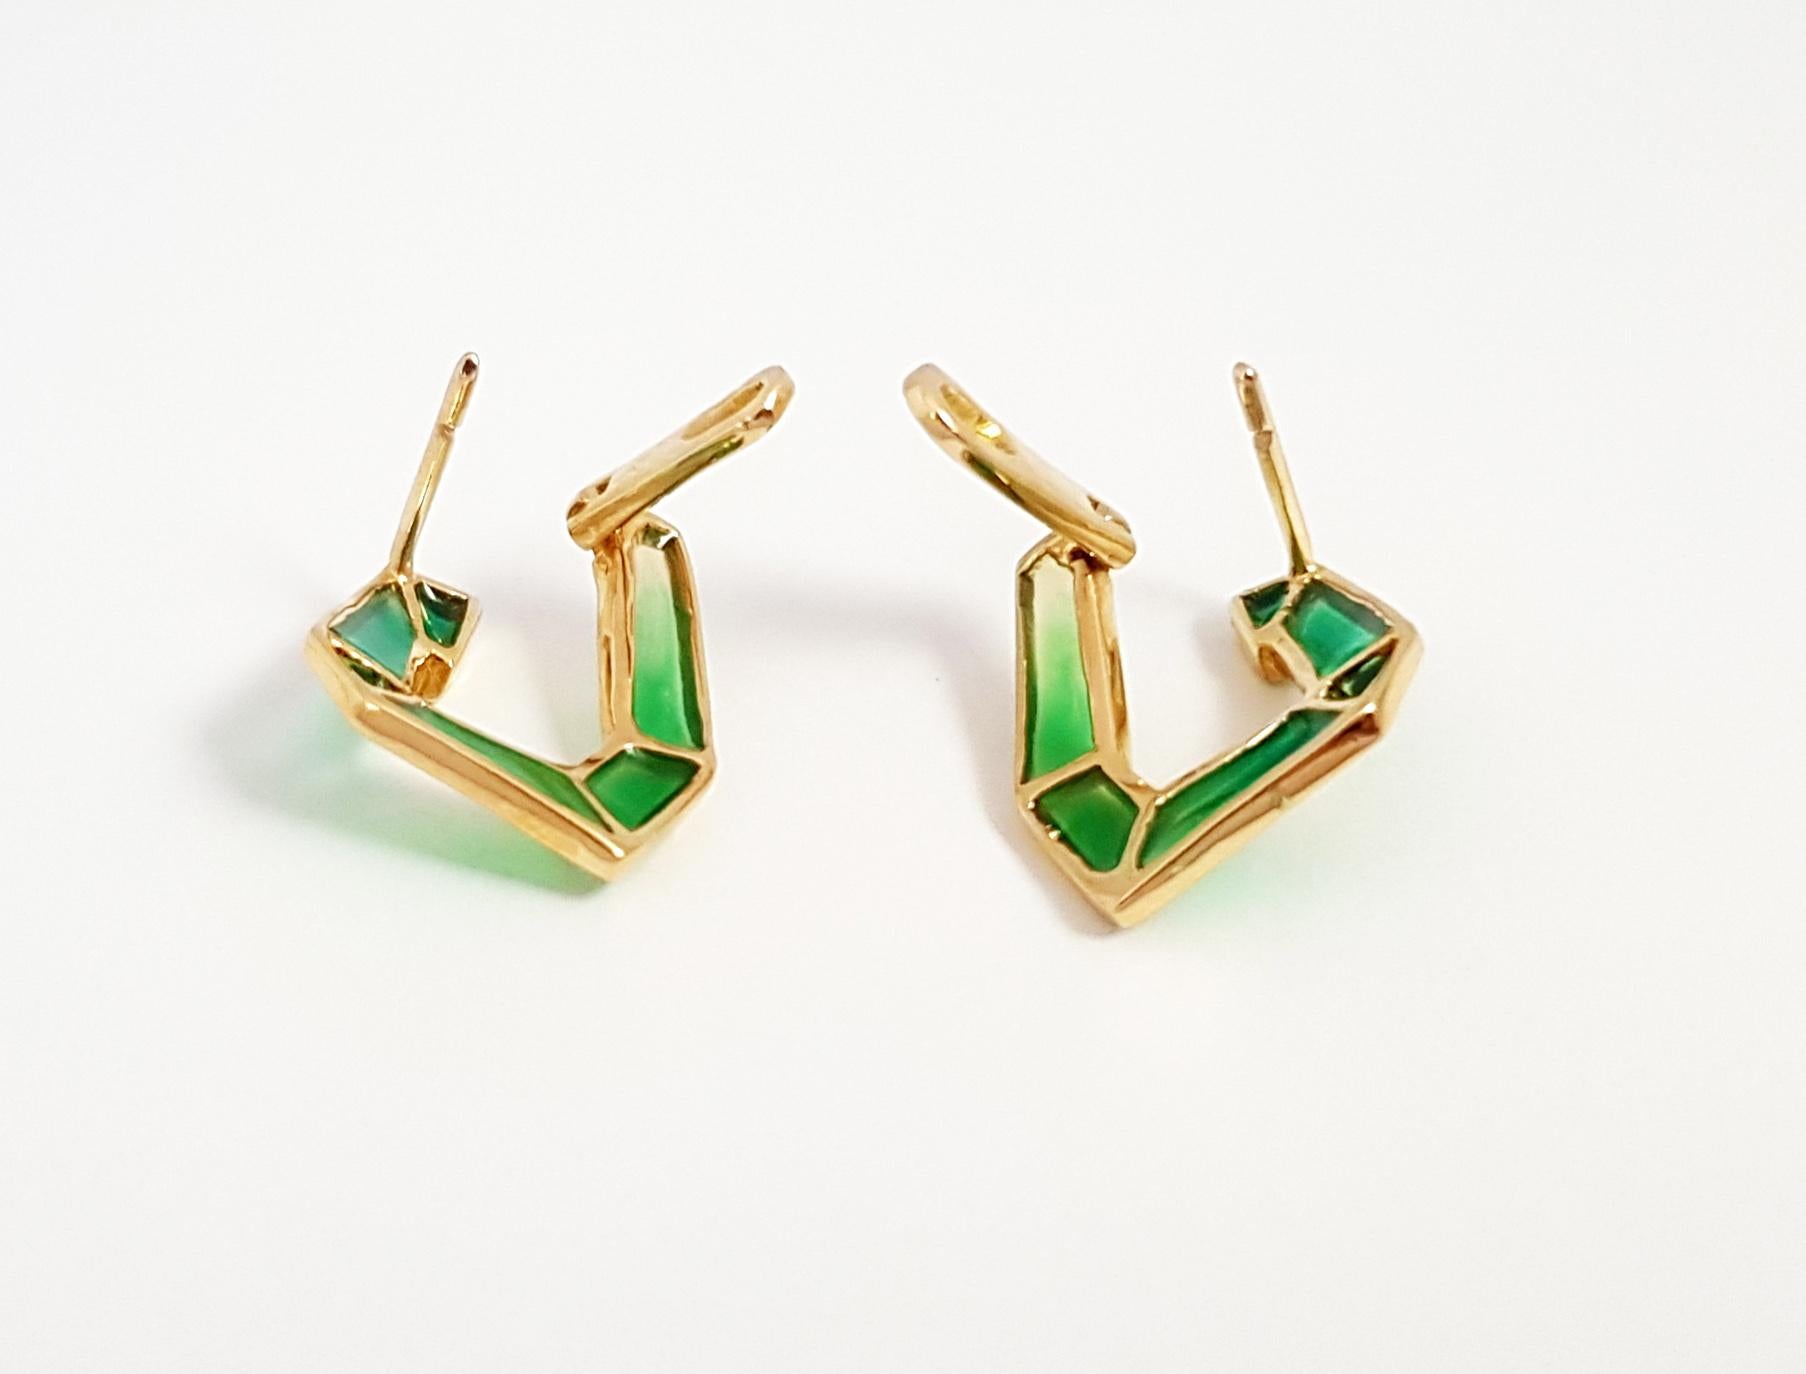 Origami Link No. 5 Tsavorite with Enamel Earrings 18K Yellow Gold Petite In New Condition For Sale In Bangkok, 10